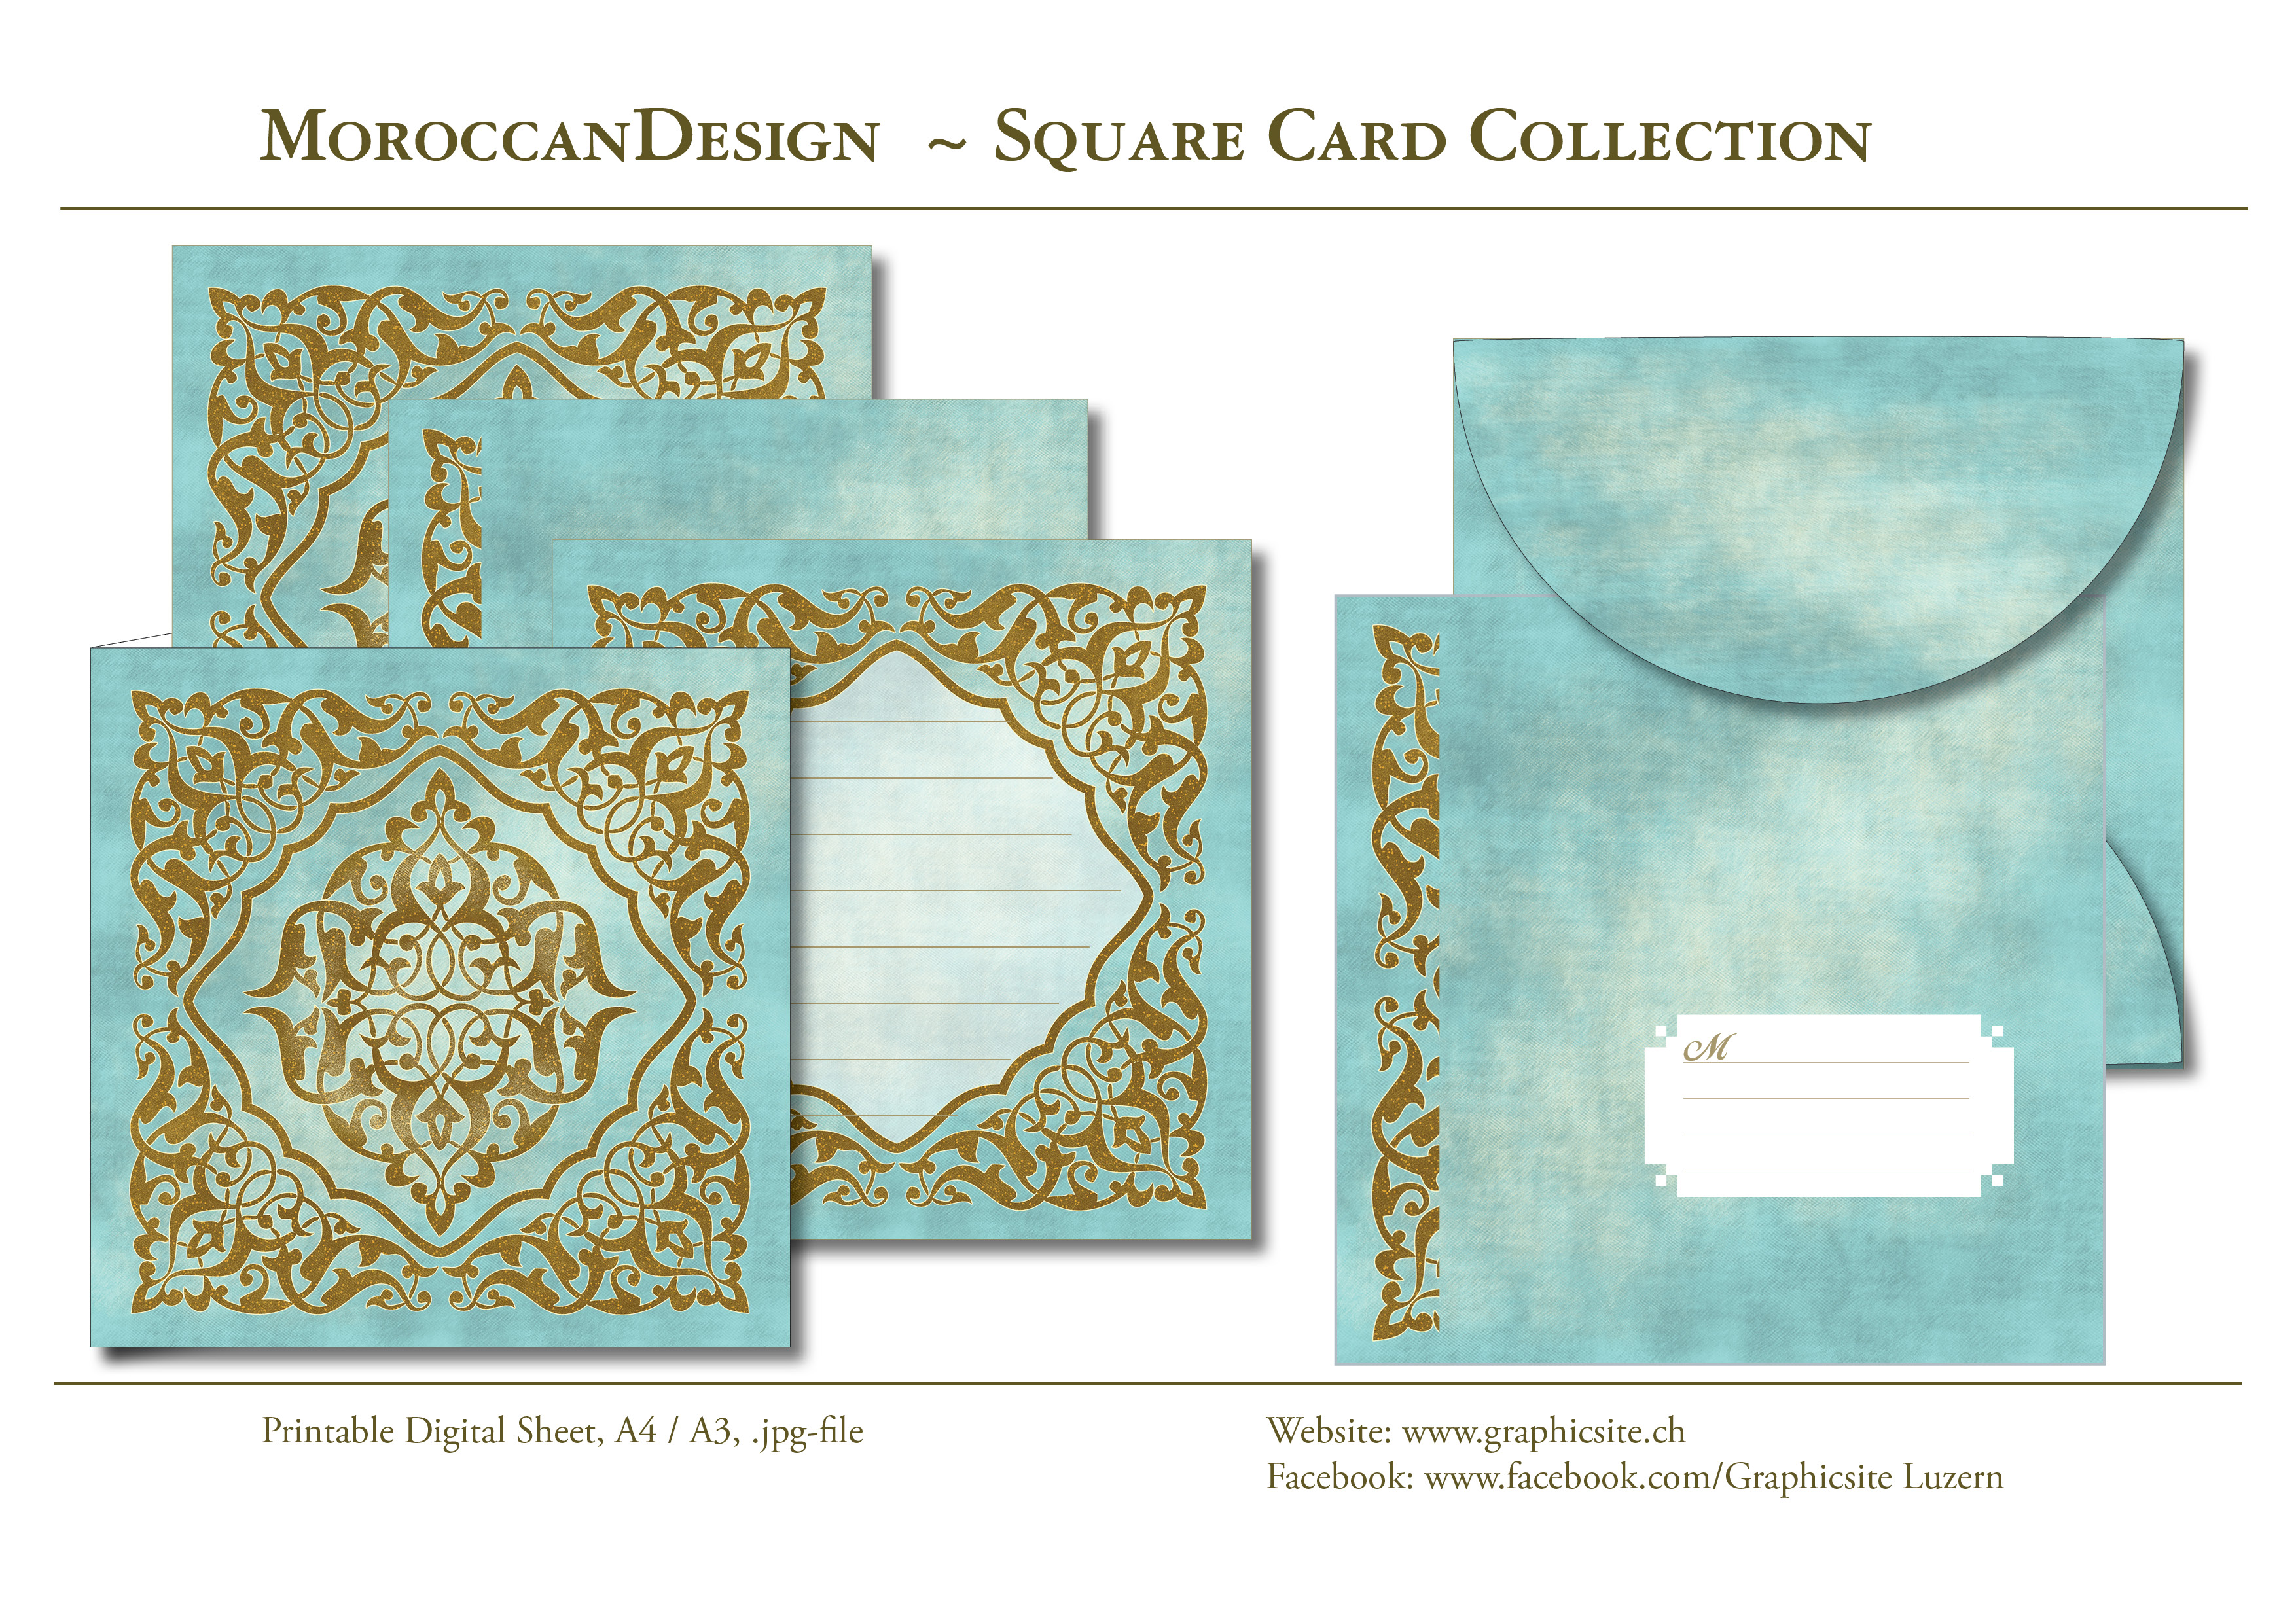 Printable Digital Sheets - Square Card Collection - MoroccanDesign - Oriental, Ornament, Golden, Vintage, Greeting Cards,